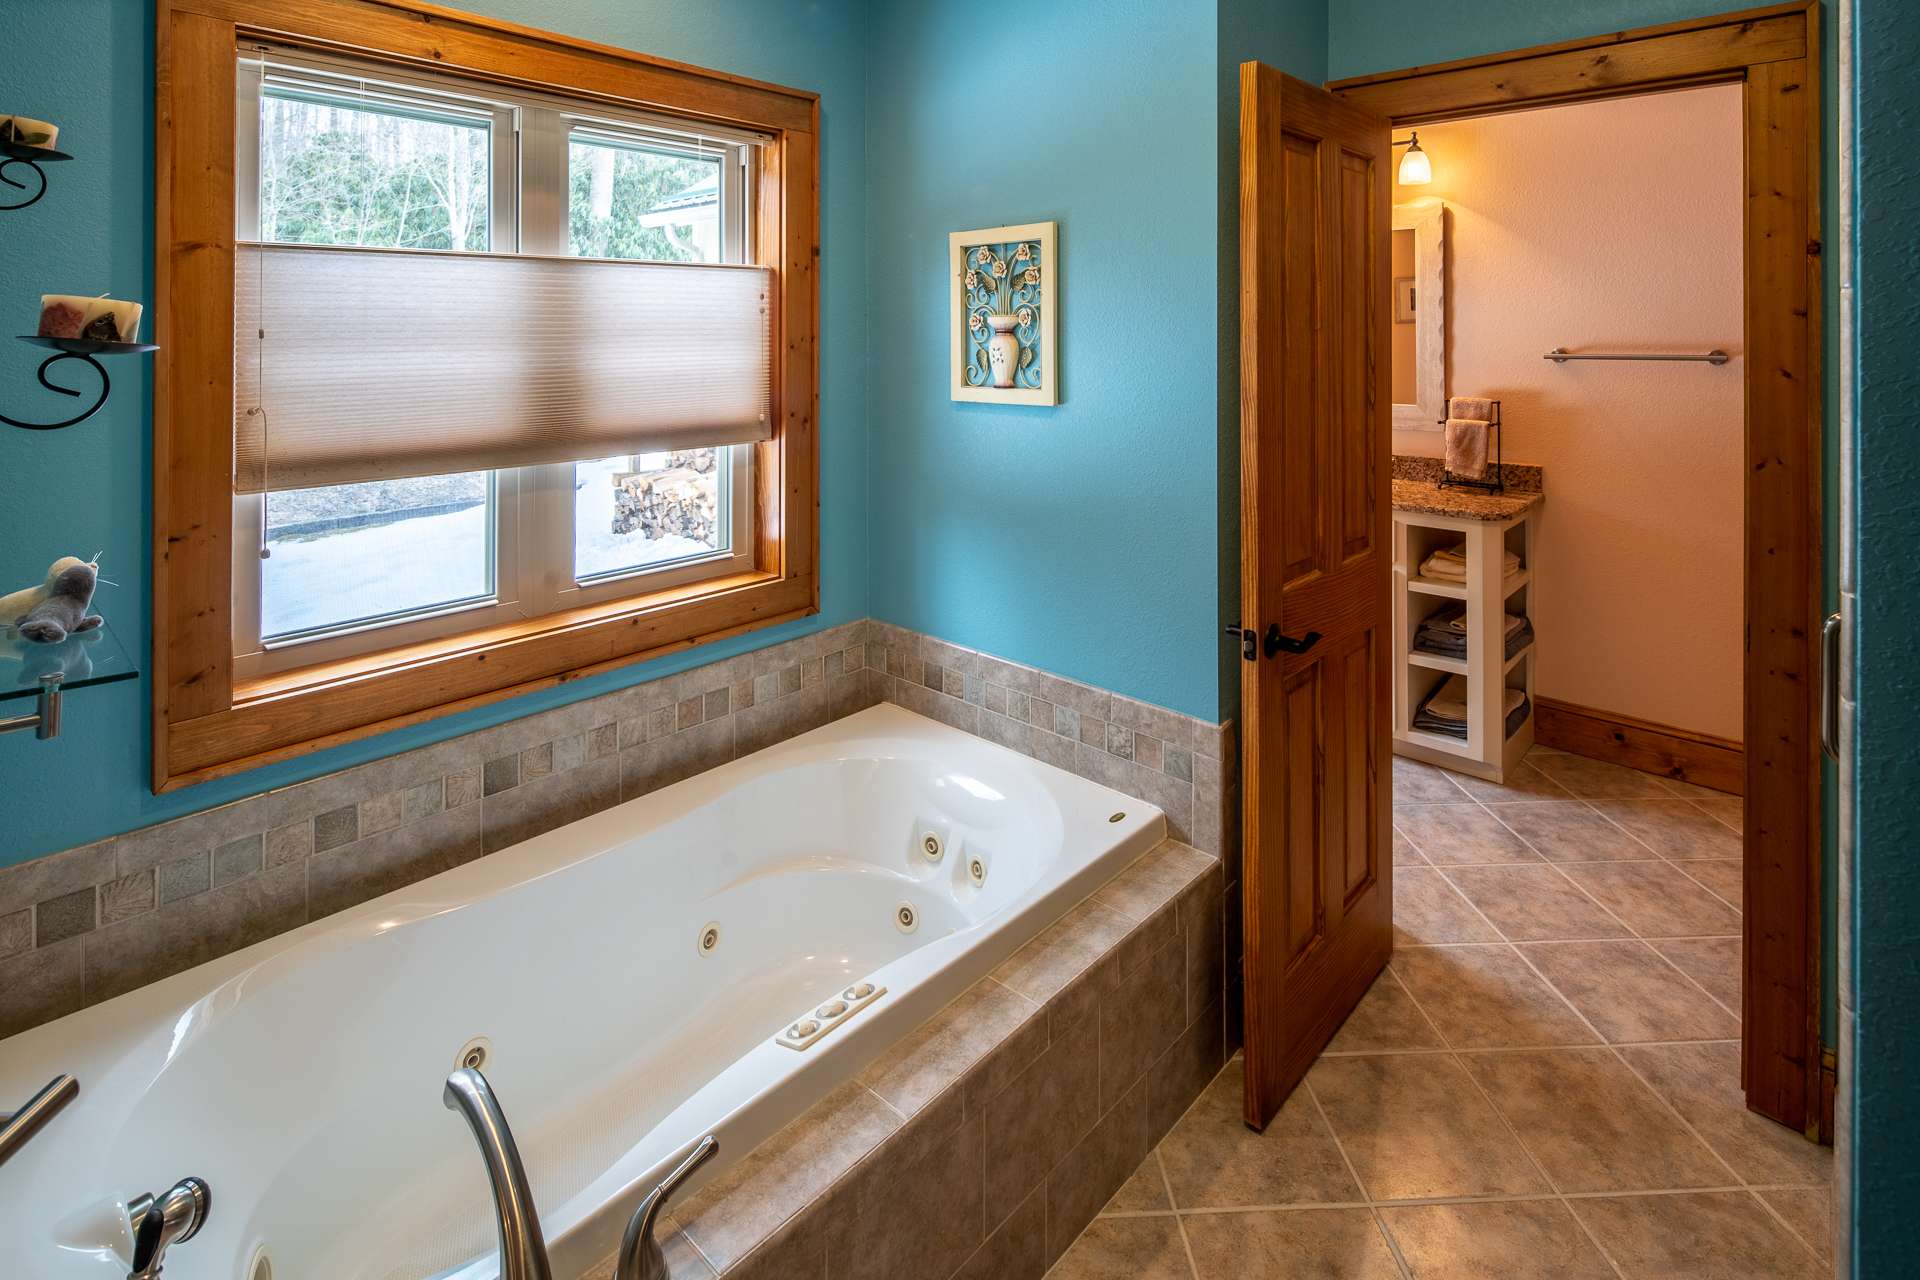 Jetted tub to relax in at the end of a hard day. Powder room is also accessible from master bath.